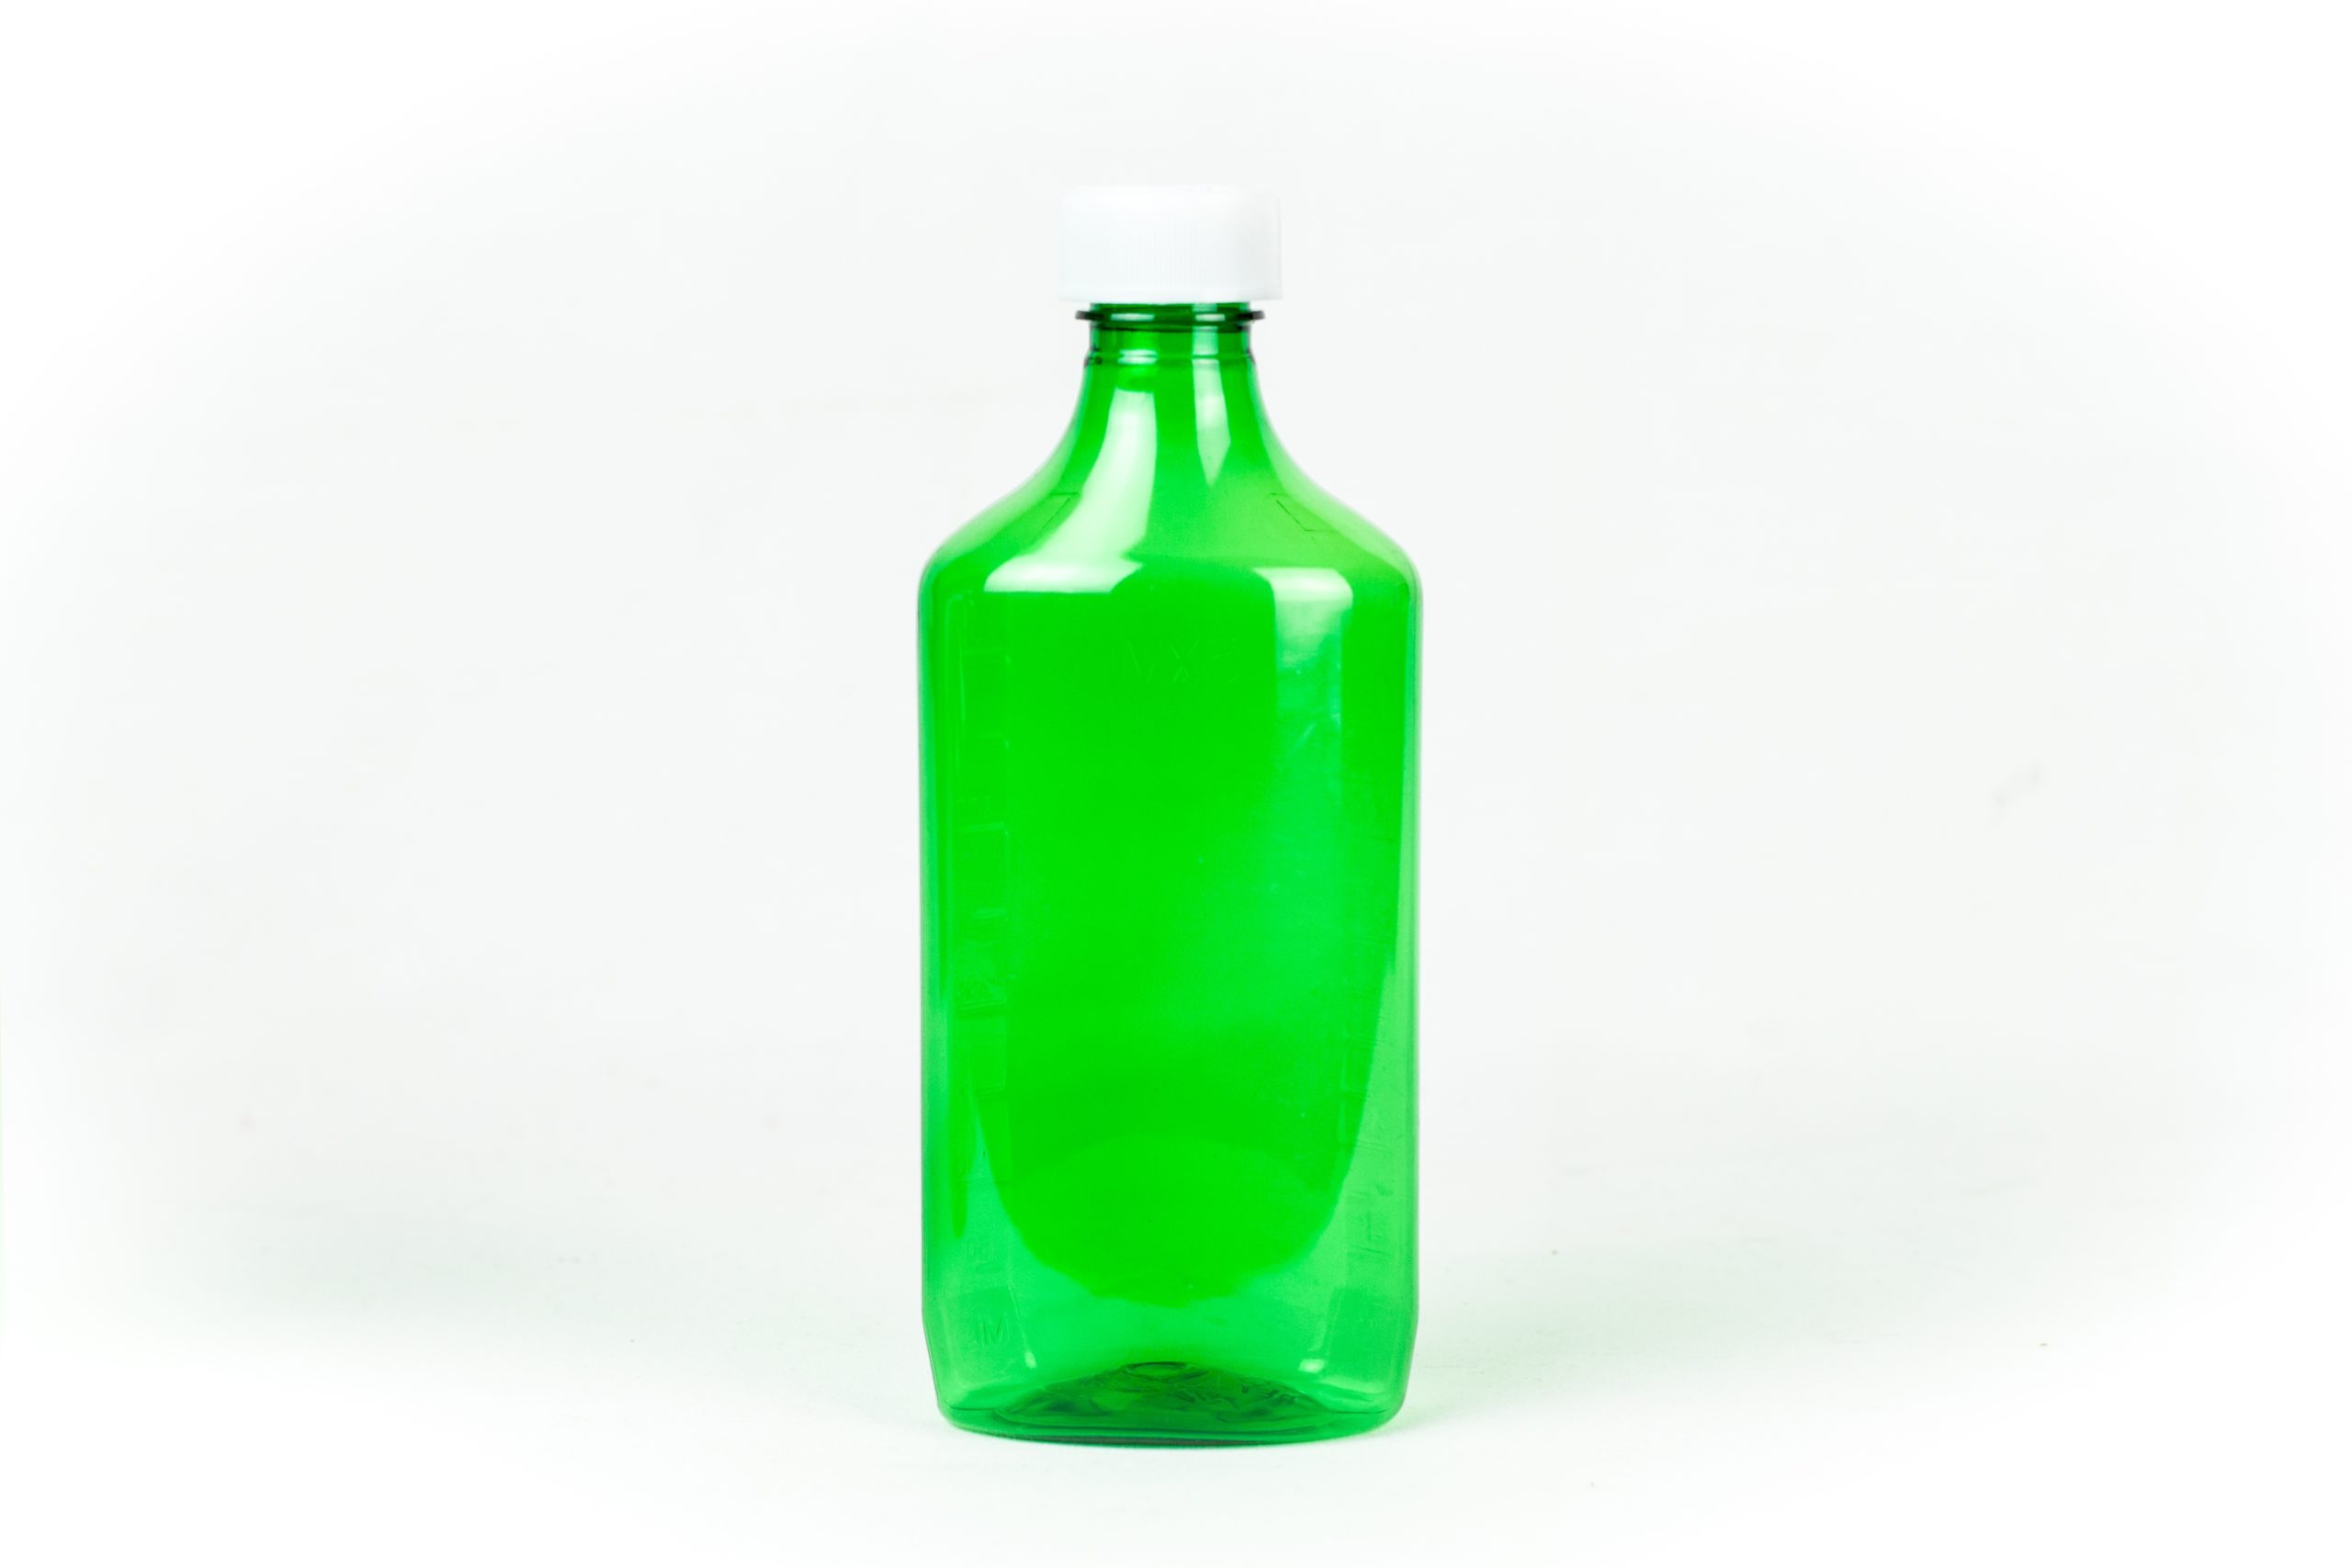 https://www.linepackagingsupplies.com/wp-content/uploads/2017/08/16-oz-green-graduated-oval-rx-bottles-with-child-resistant-caps-scaled.jpg